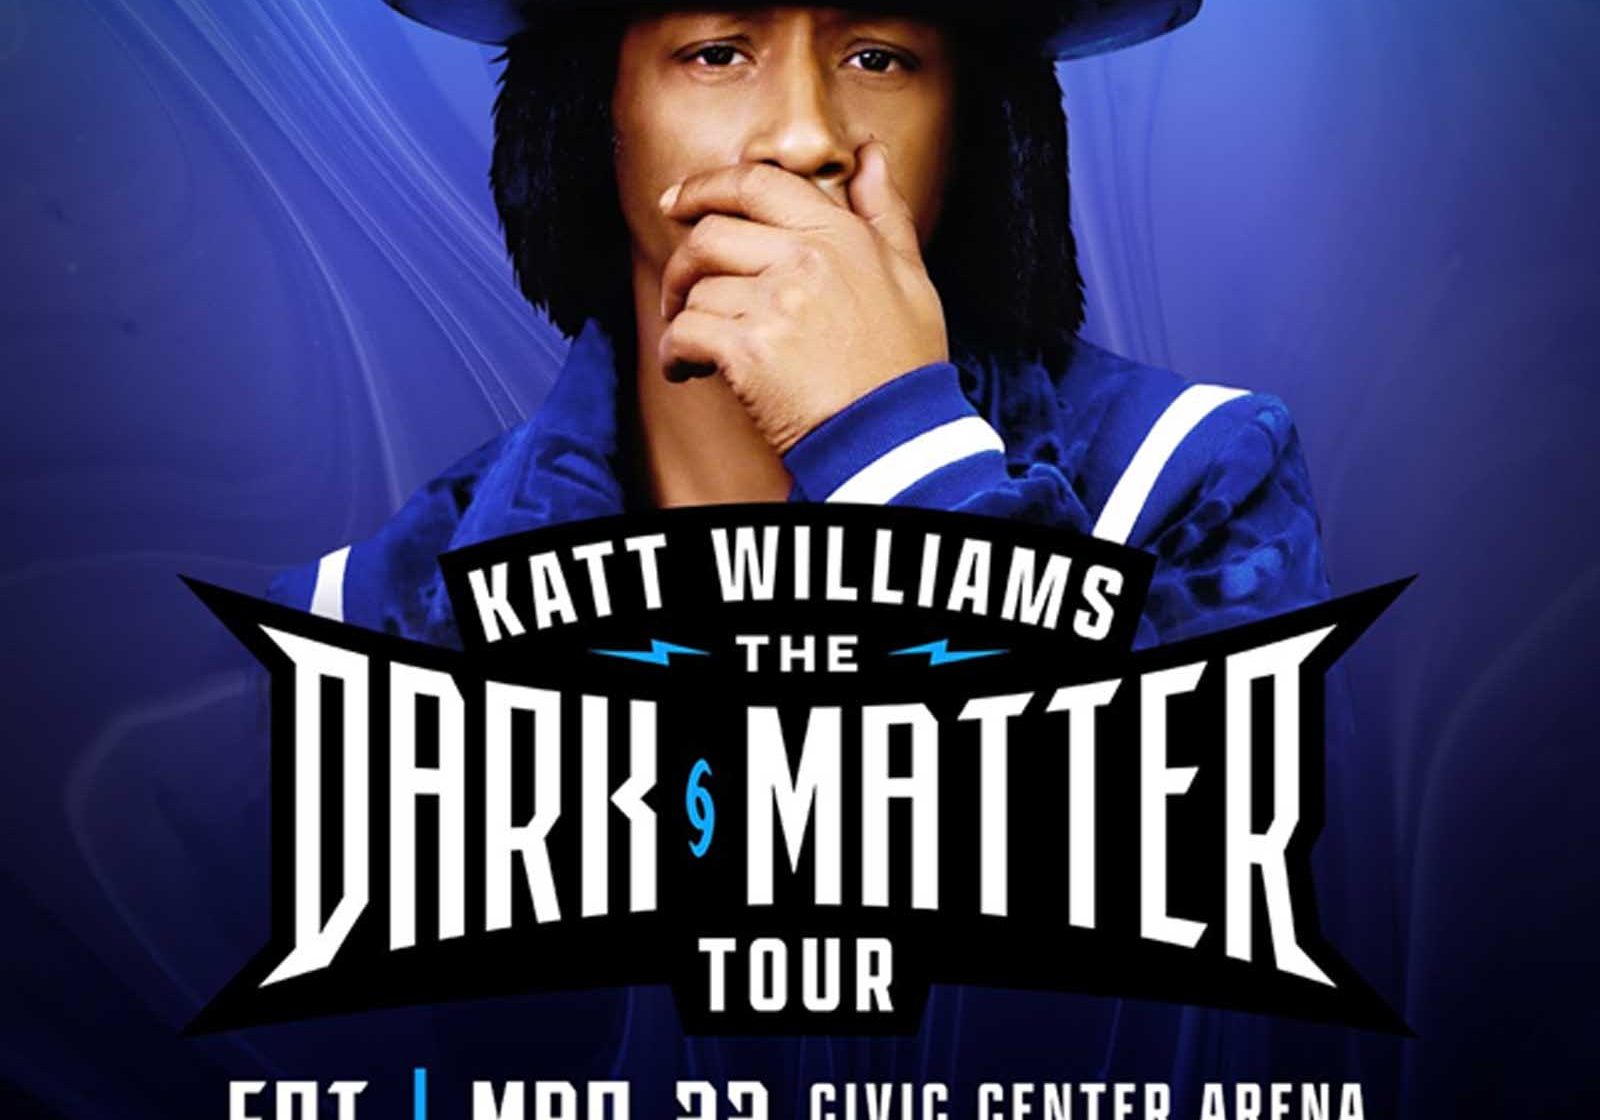 Katt Williams Coming To Civic Center In March